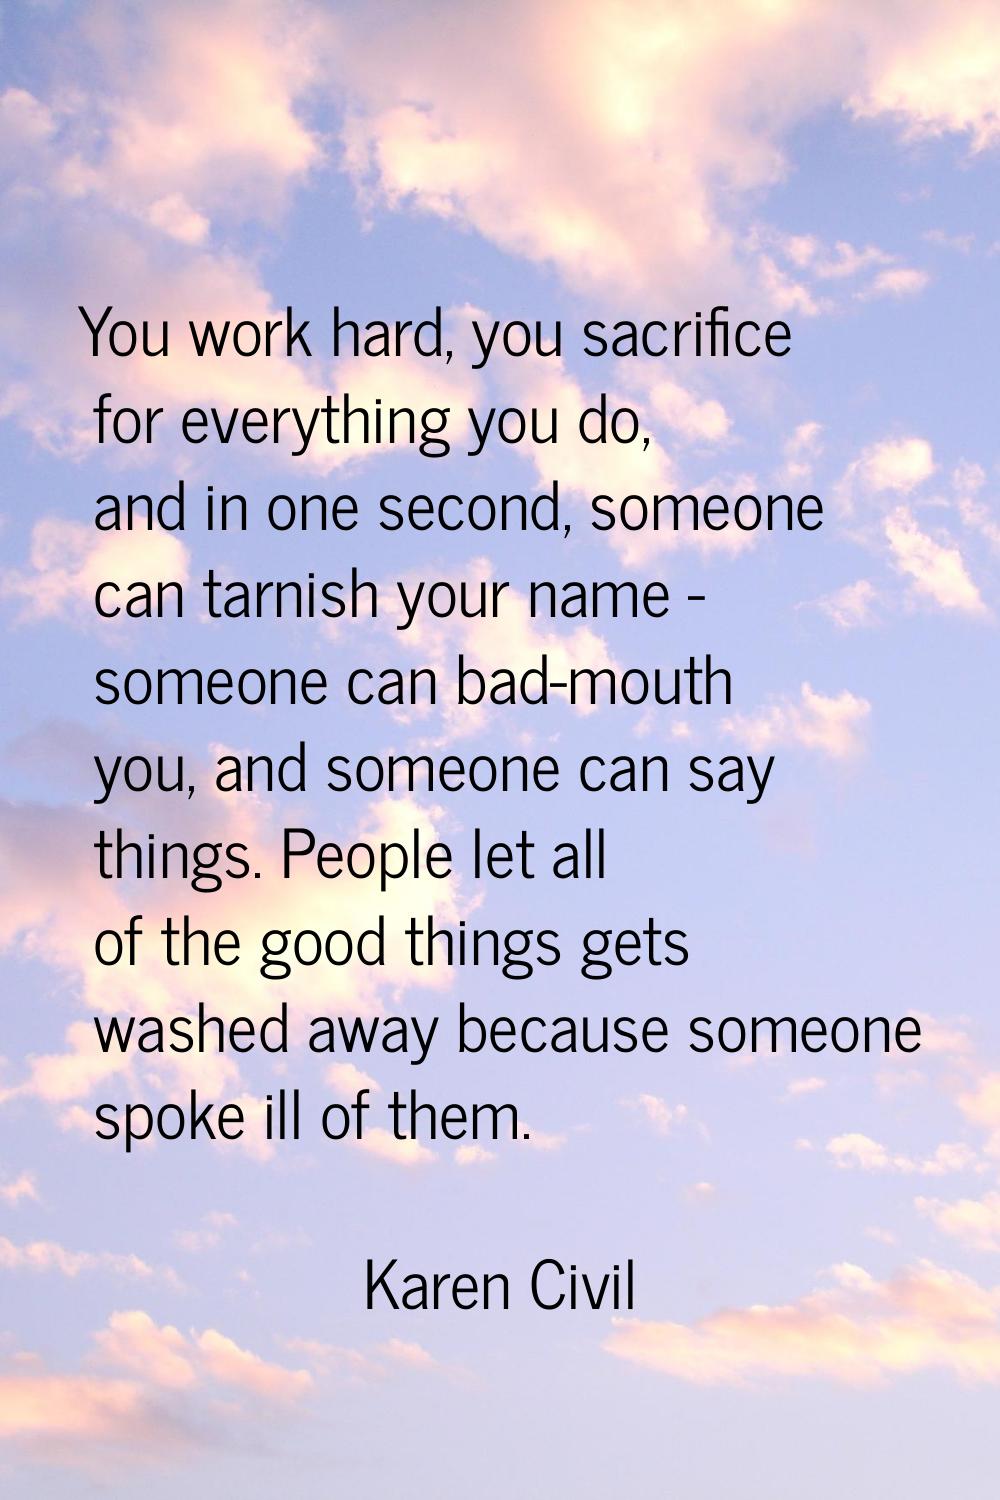 You work hard, you sacrifice for everything you do, and in one second, someone can tarnish your nam